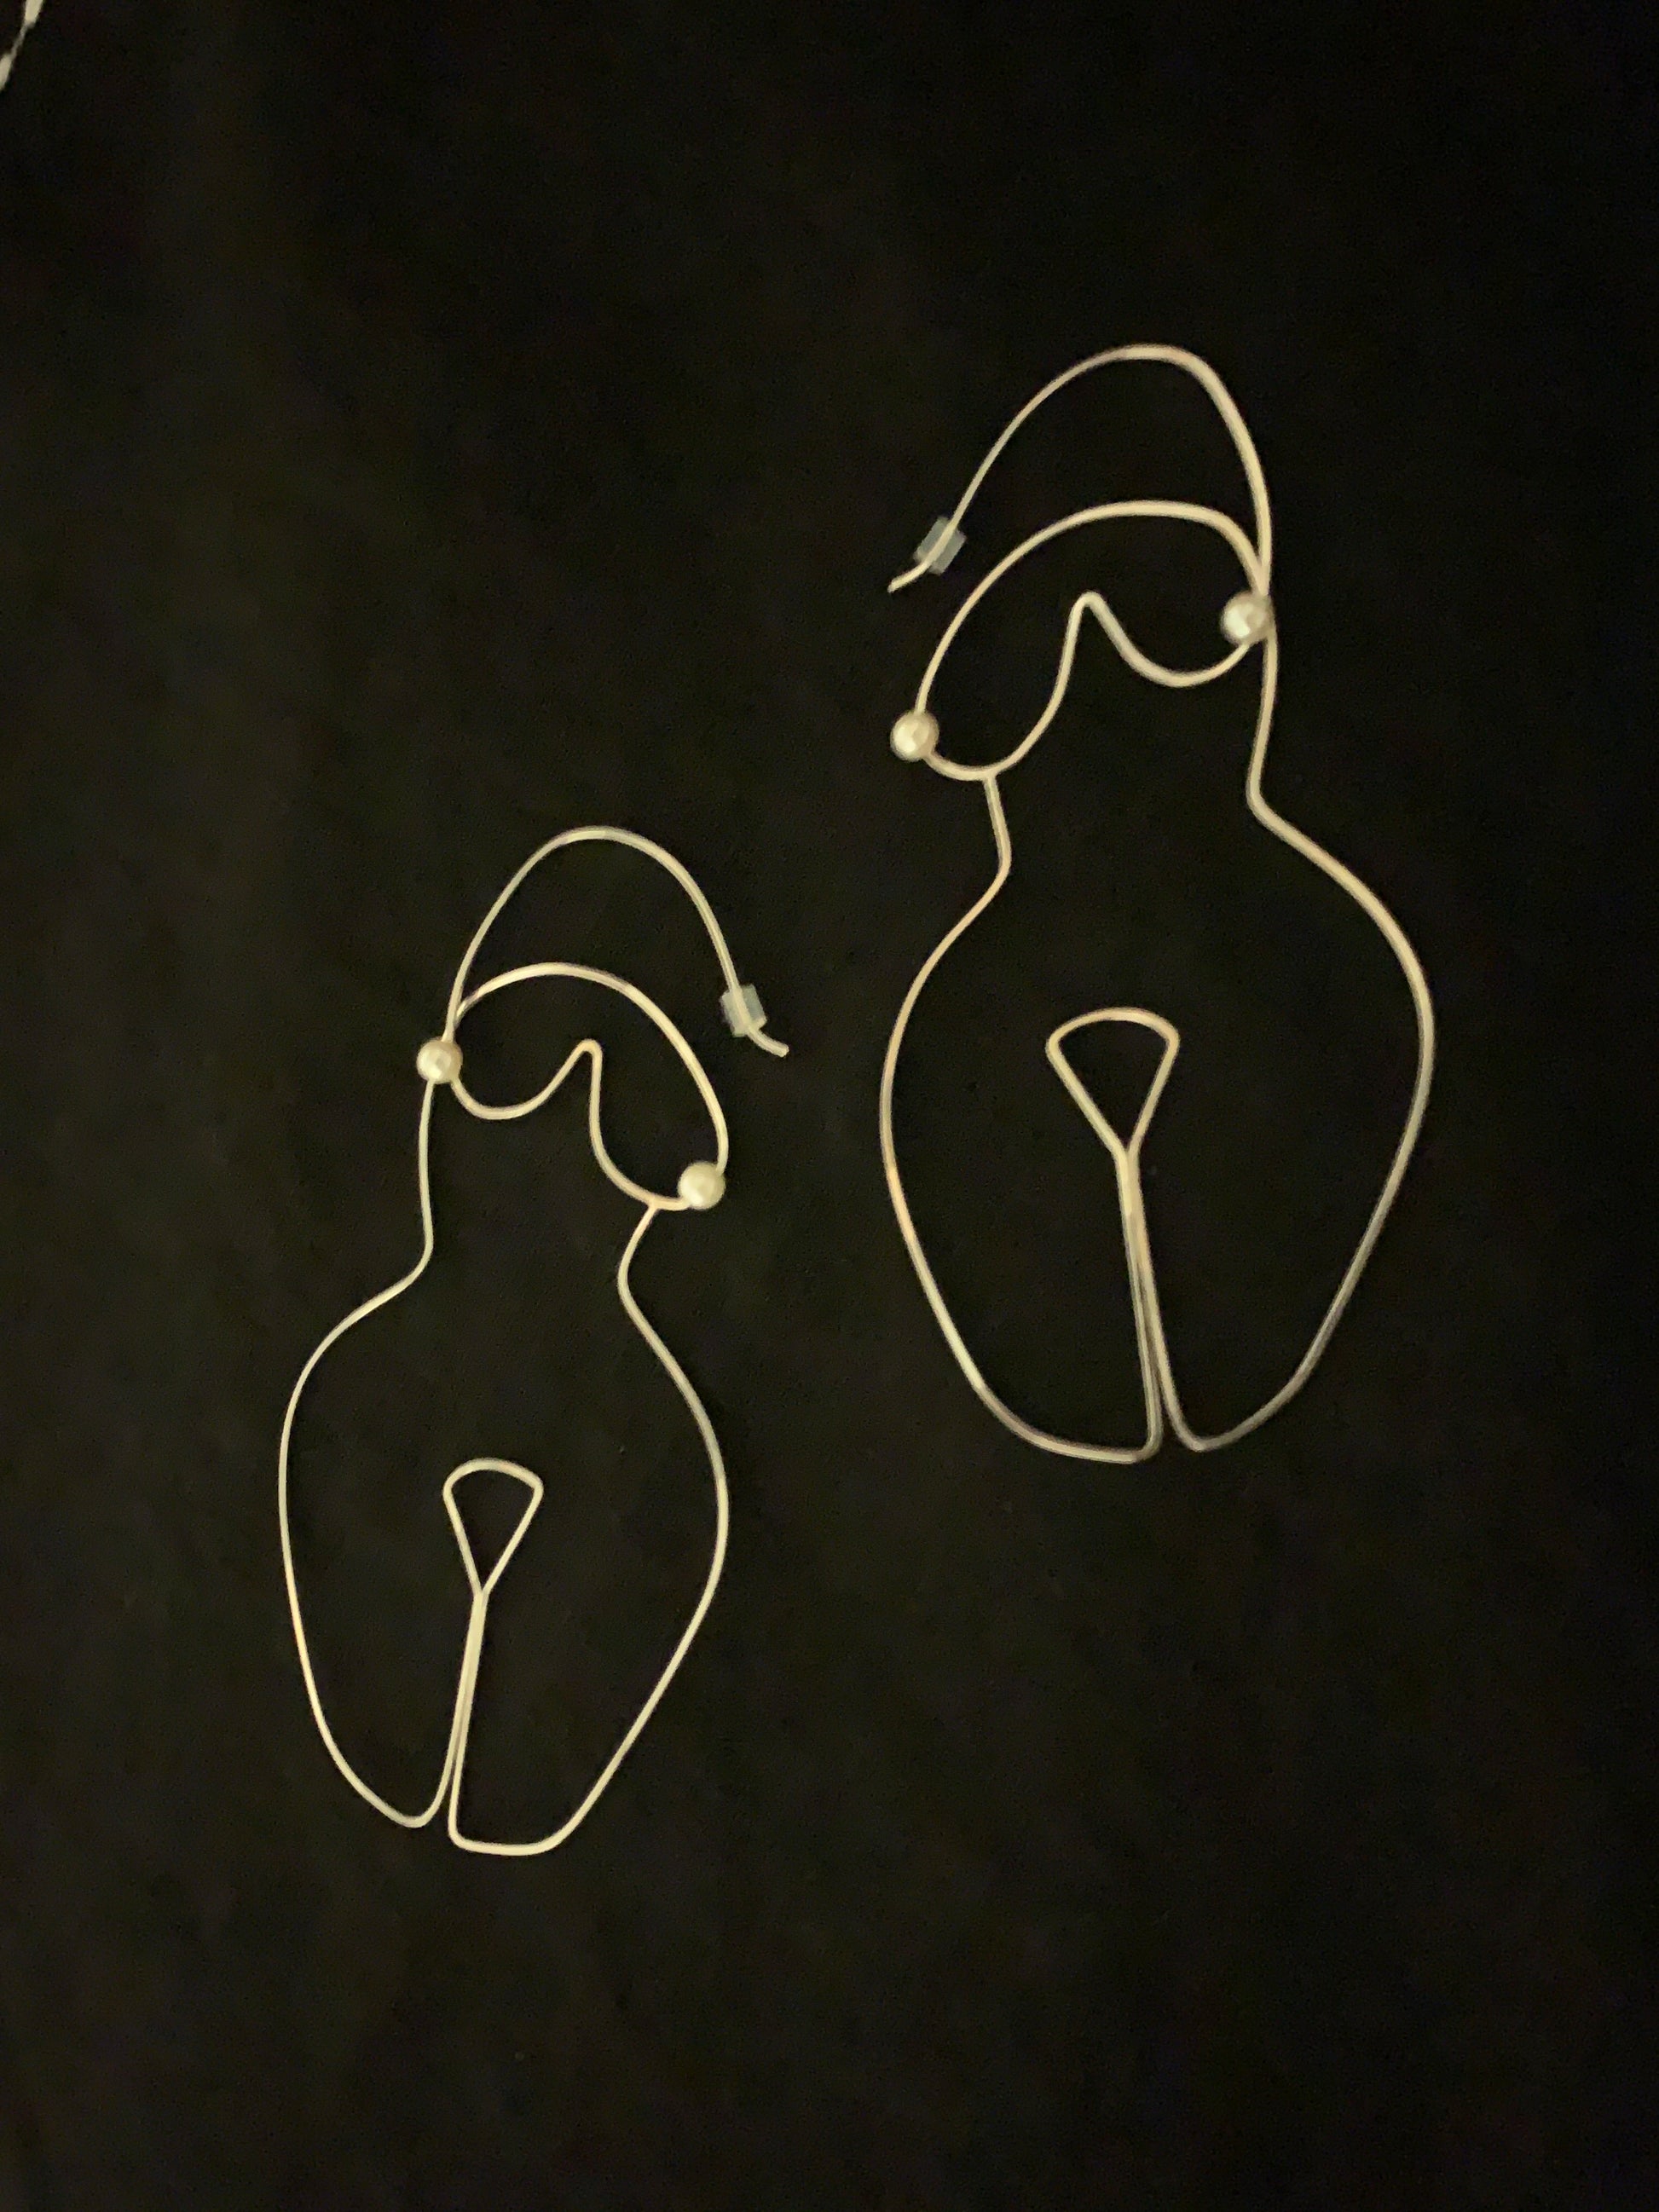 Sterling Silver wire shaped earrings formed into the shape of a woman's body with pearls as the nipples on a black background.